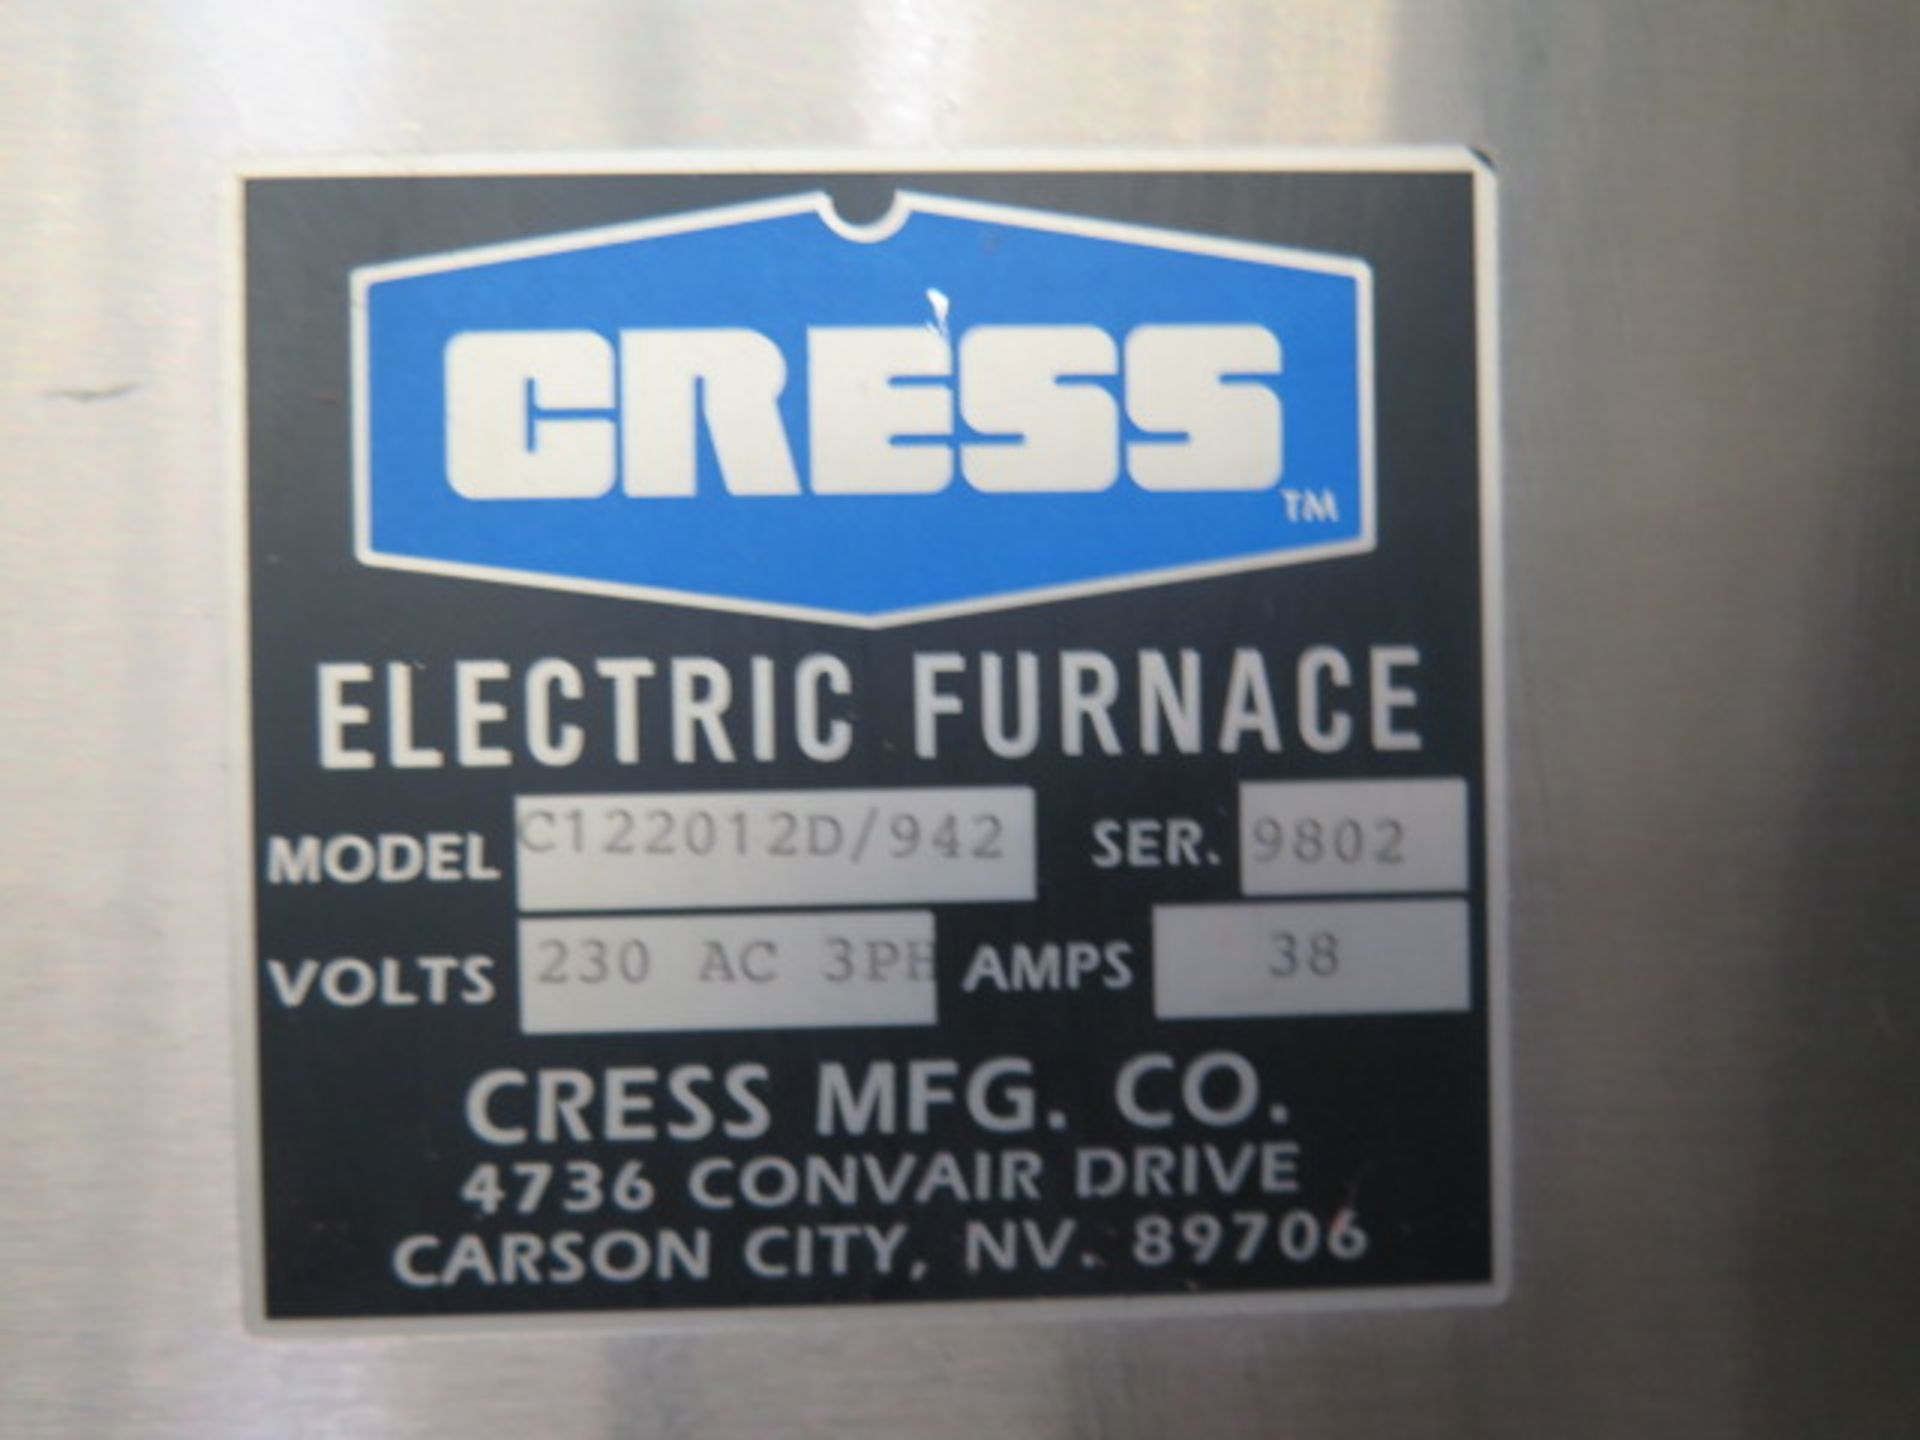 Cress C122012D/942 38-Amp Dual Electric Furnace s/n 9802 w/ Dugital Temp Controllers (SOLD AS-IS - - Image 11 of 11